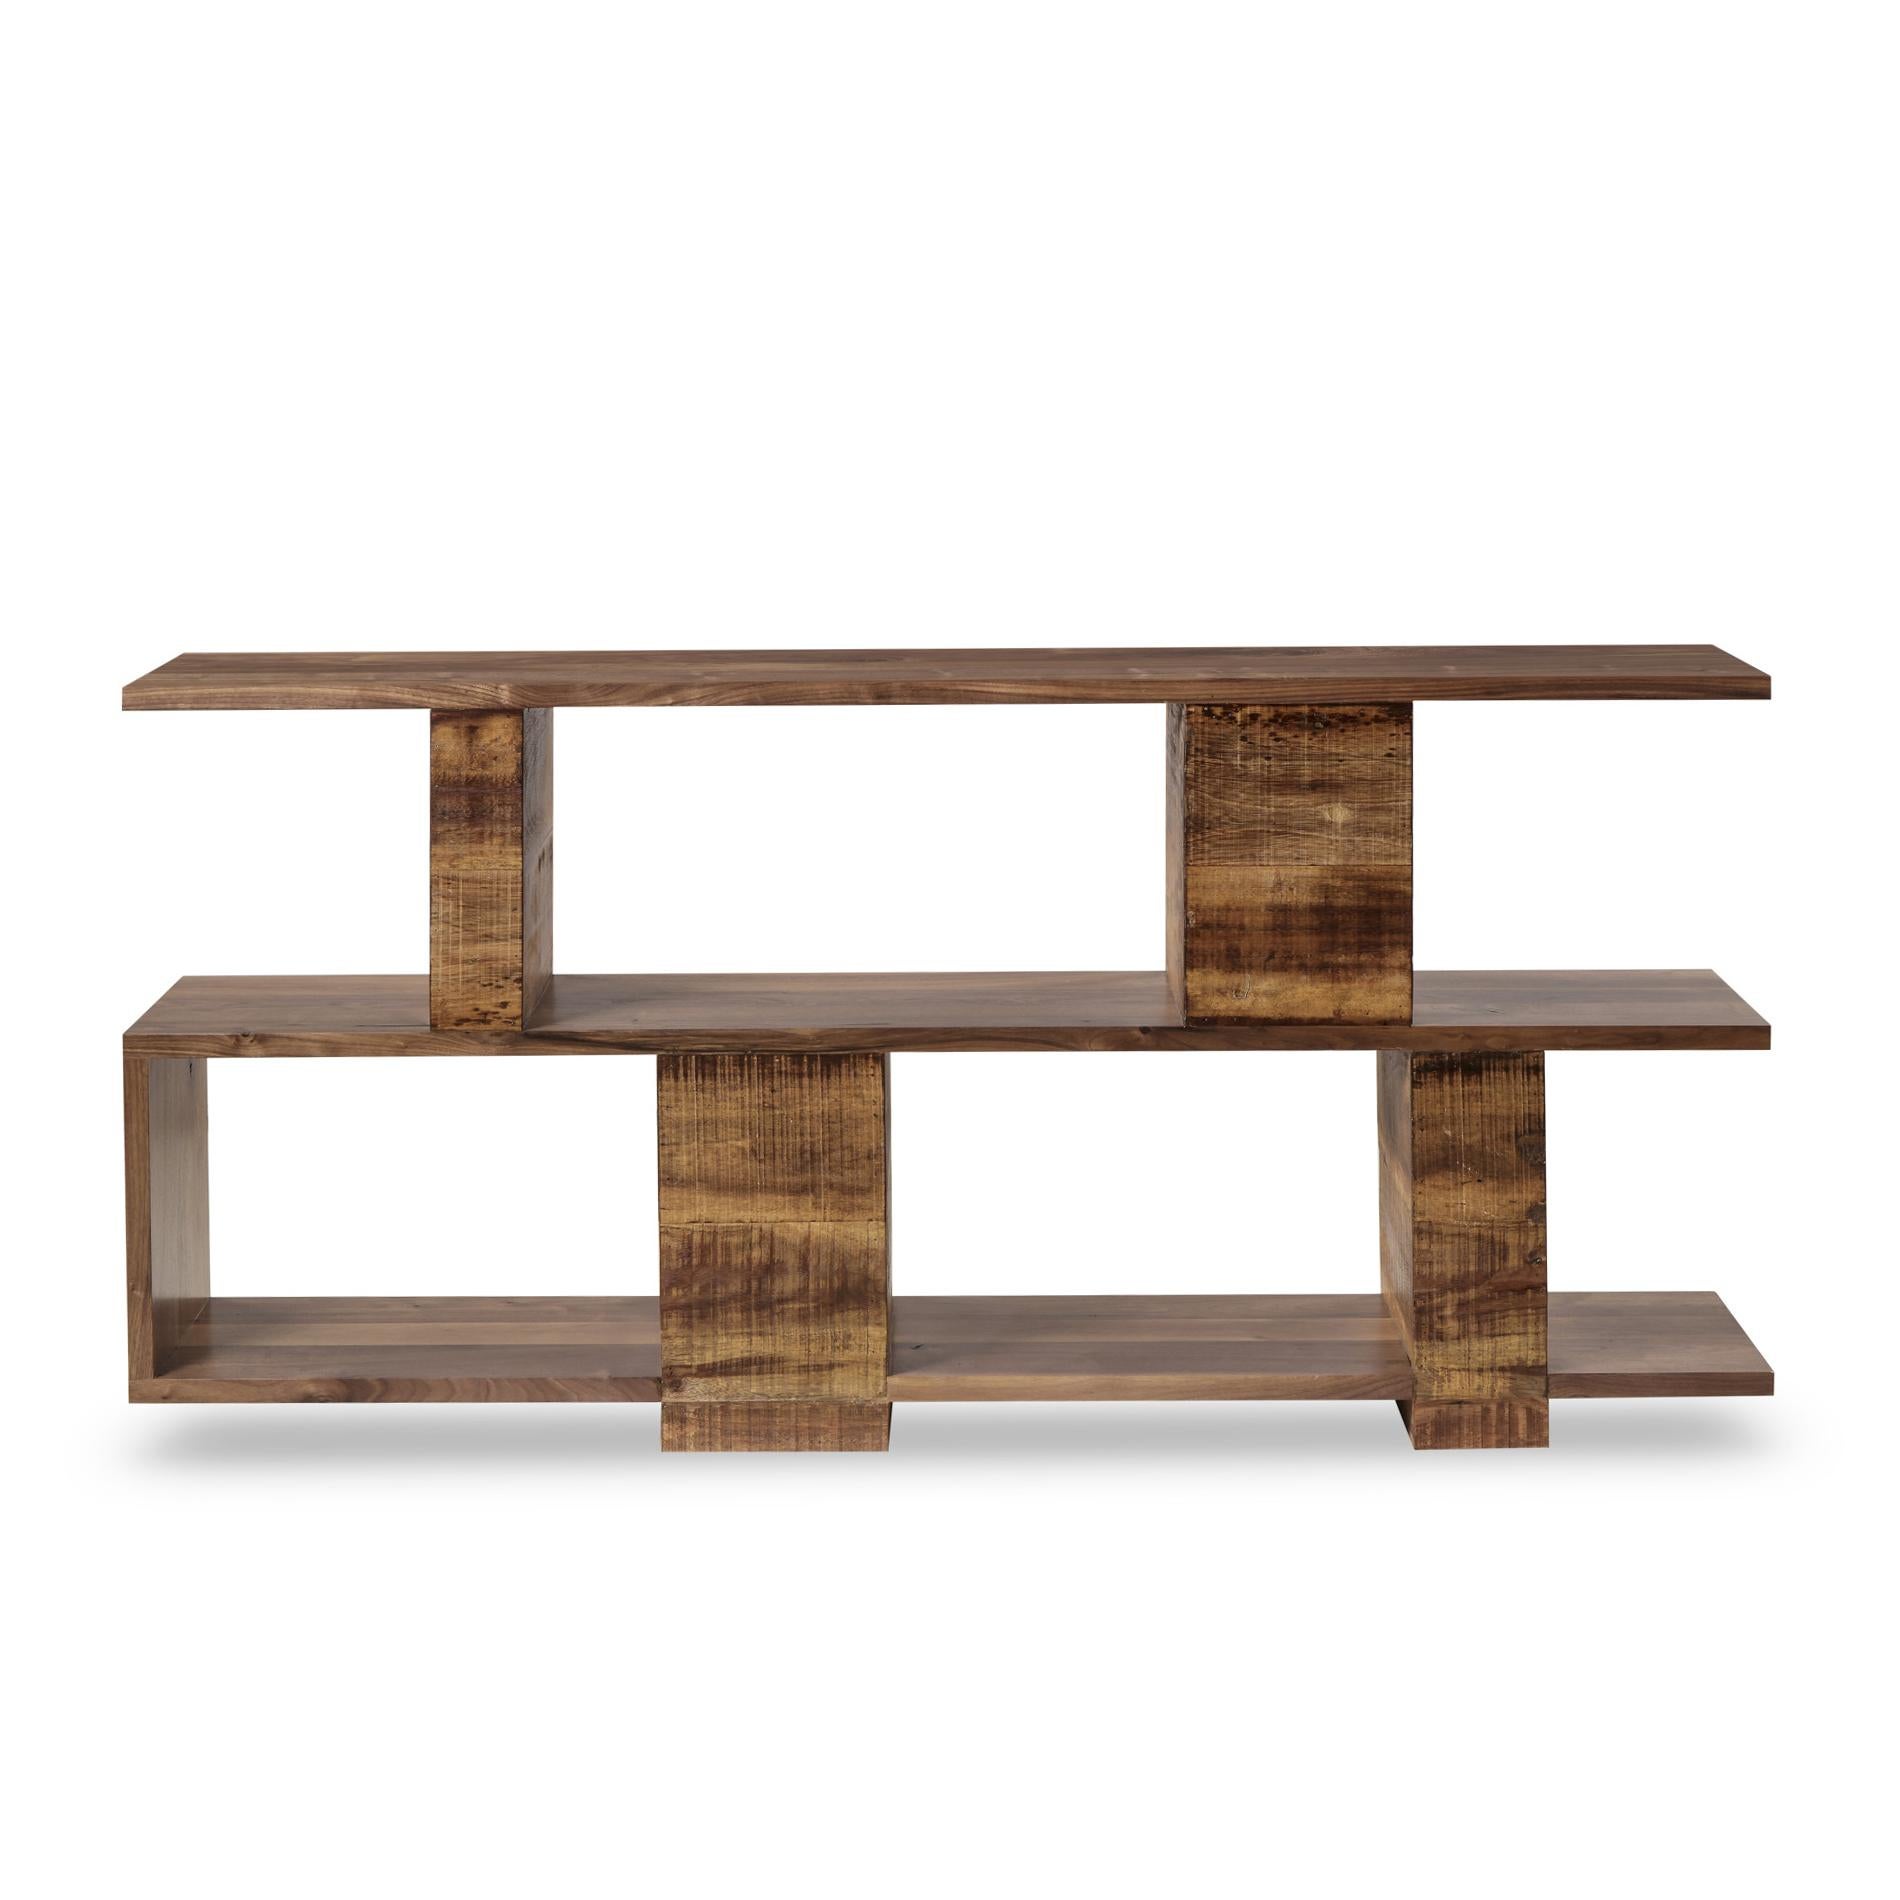 Console table Autel made with
peroba wood in walnut finish.